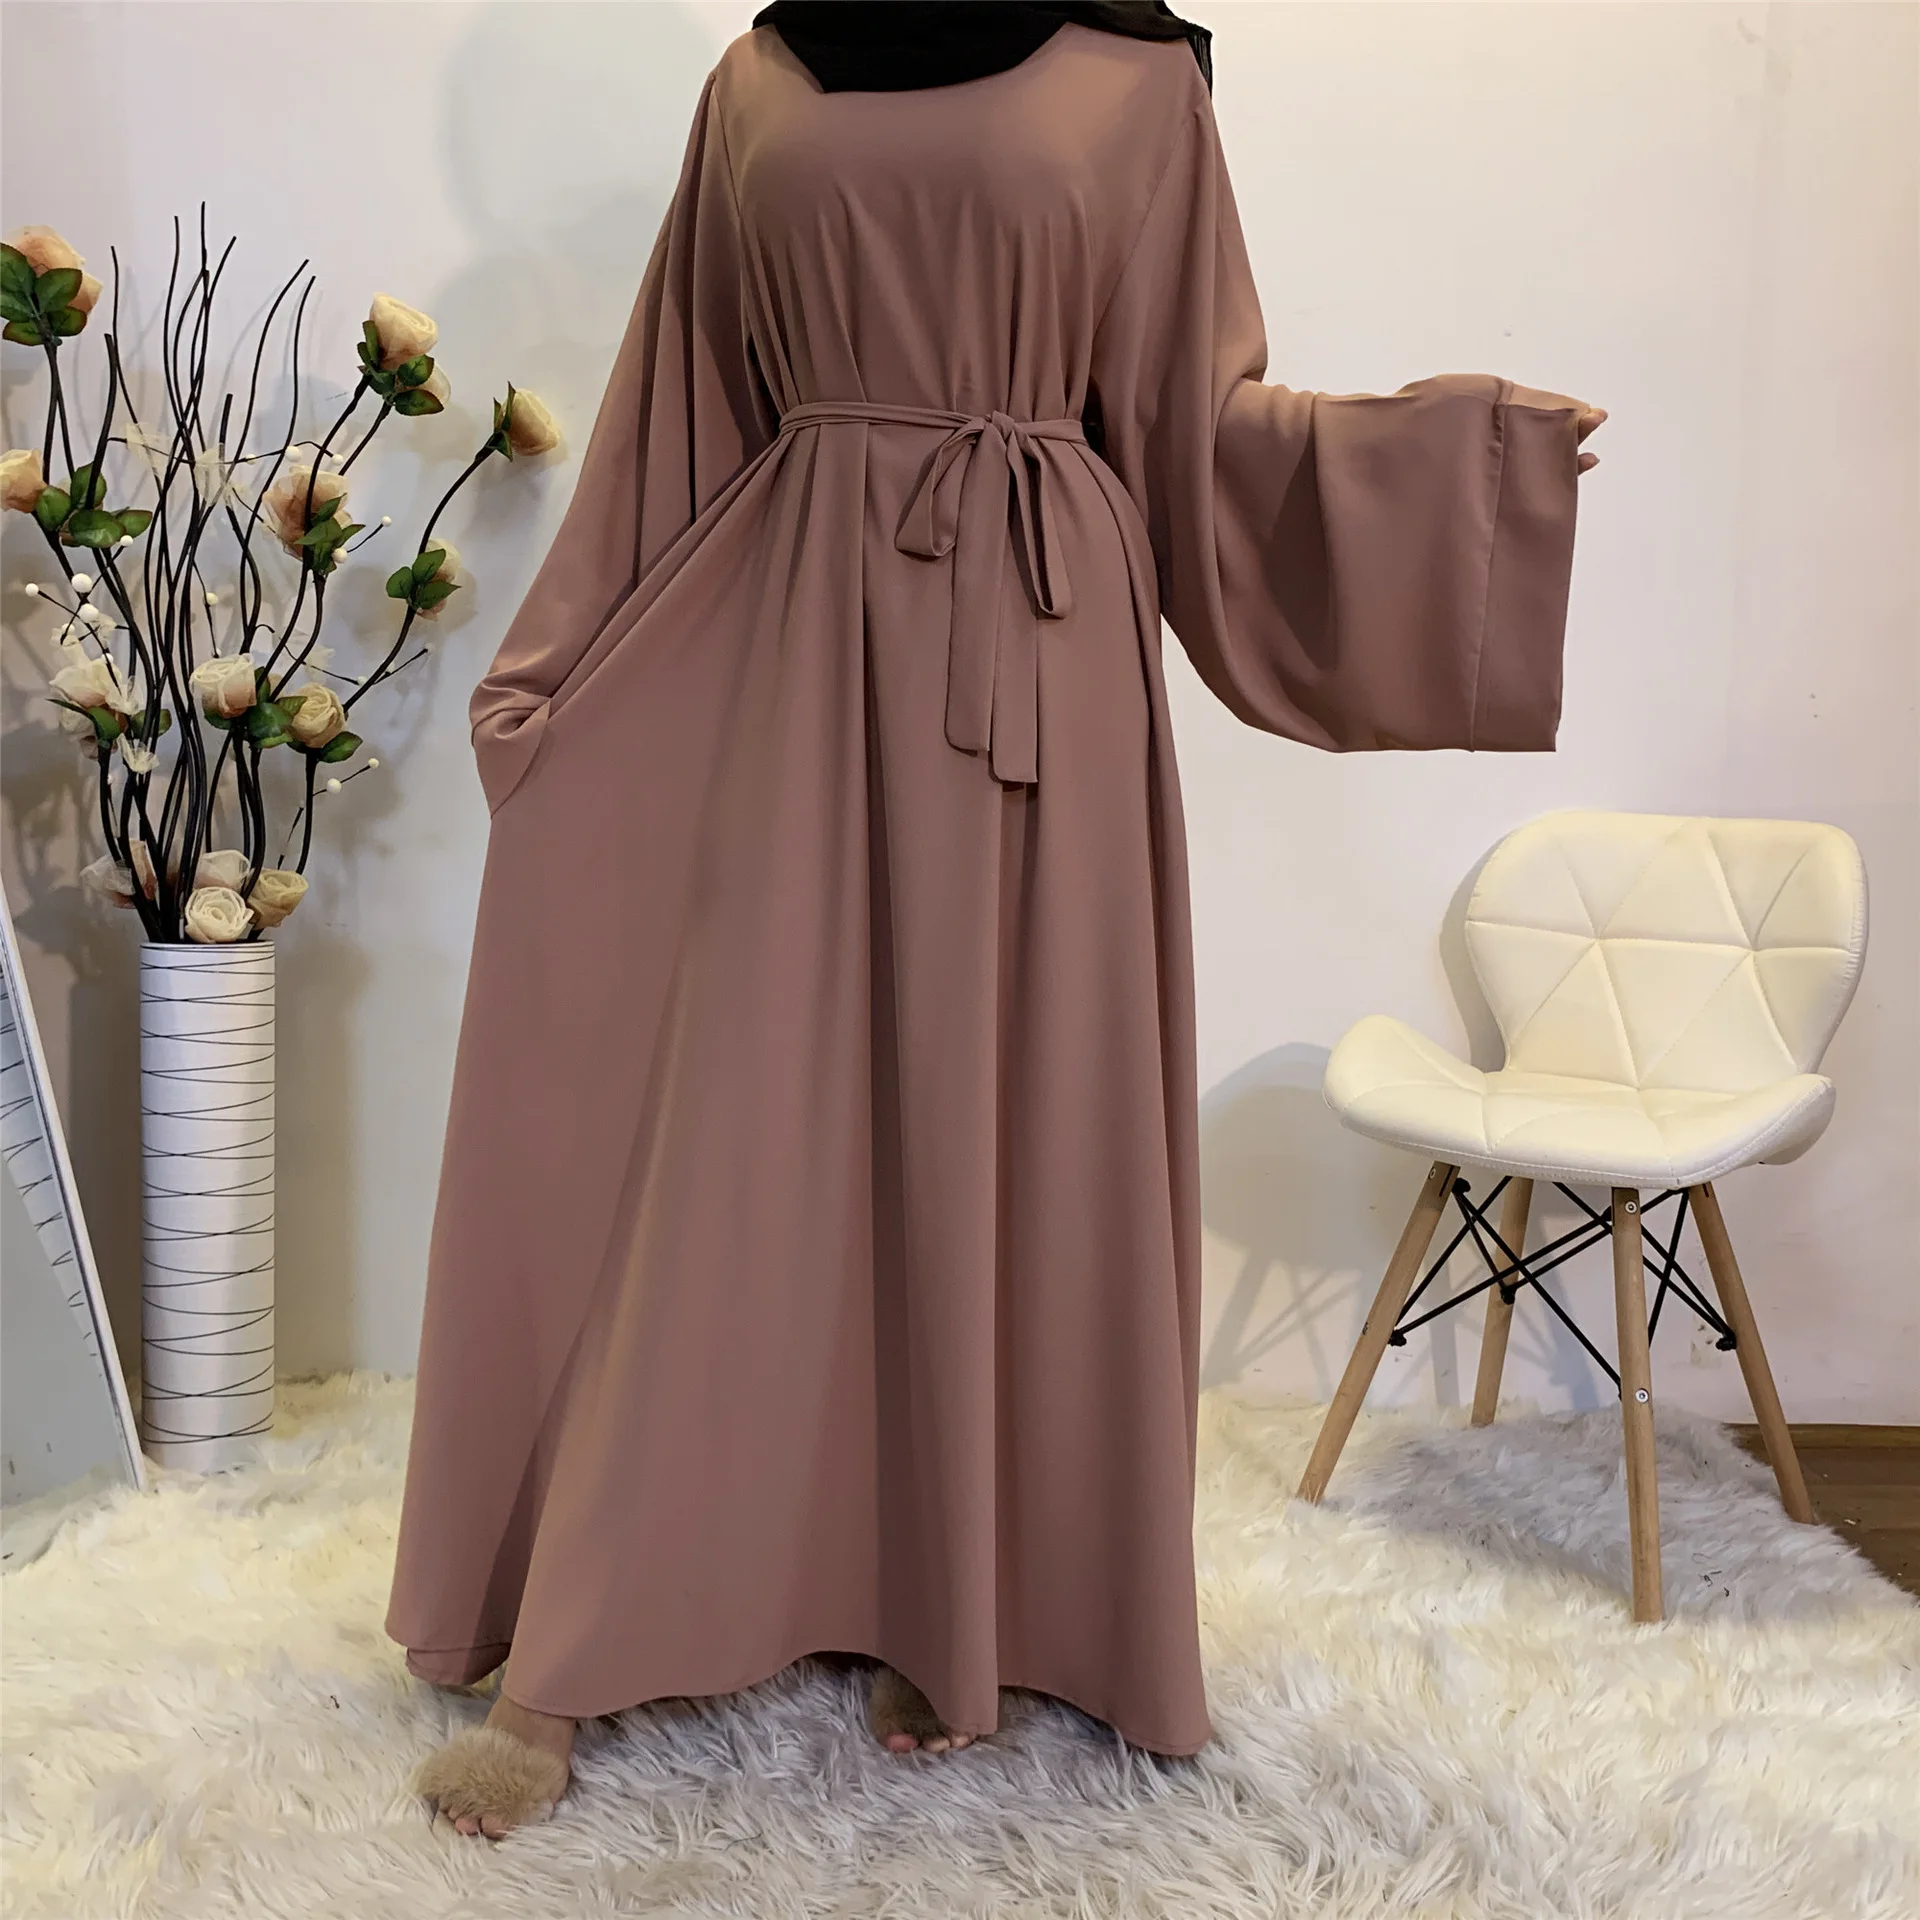 

Wholesale Price Simple Modest Islamic Fancy Party Evening Clothing Solid Color Wide Sleeve Women Abaya Muslim Dresses